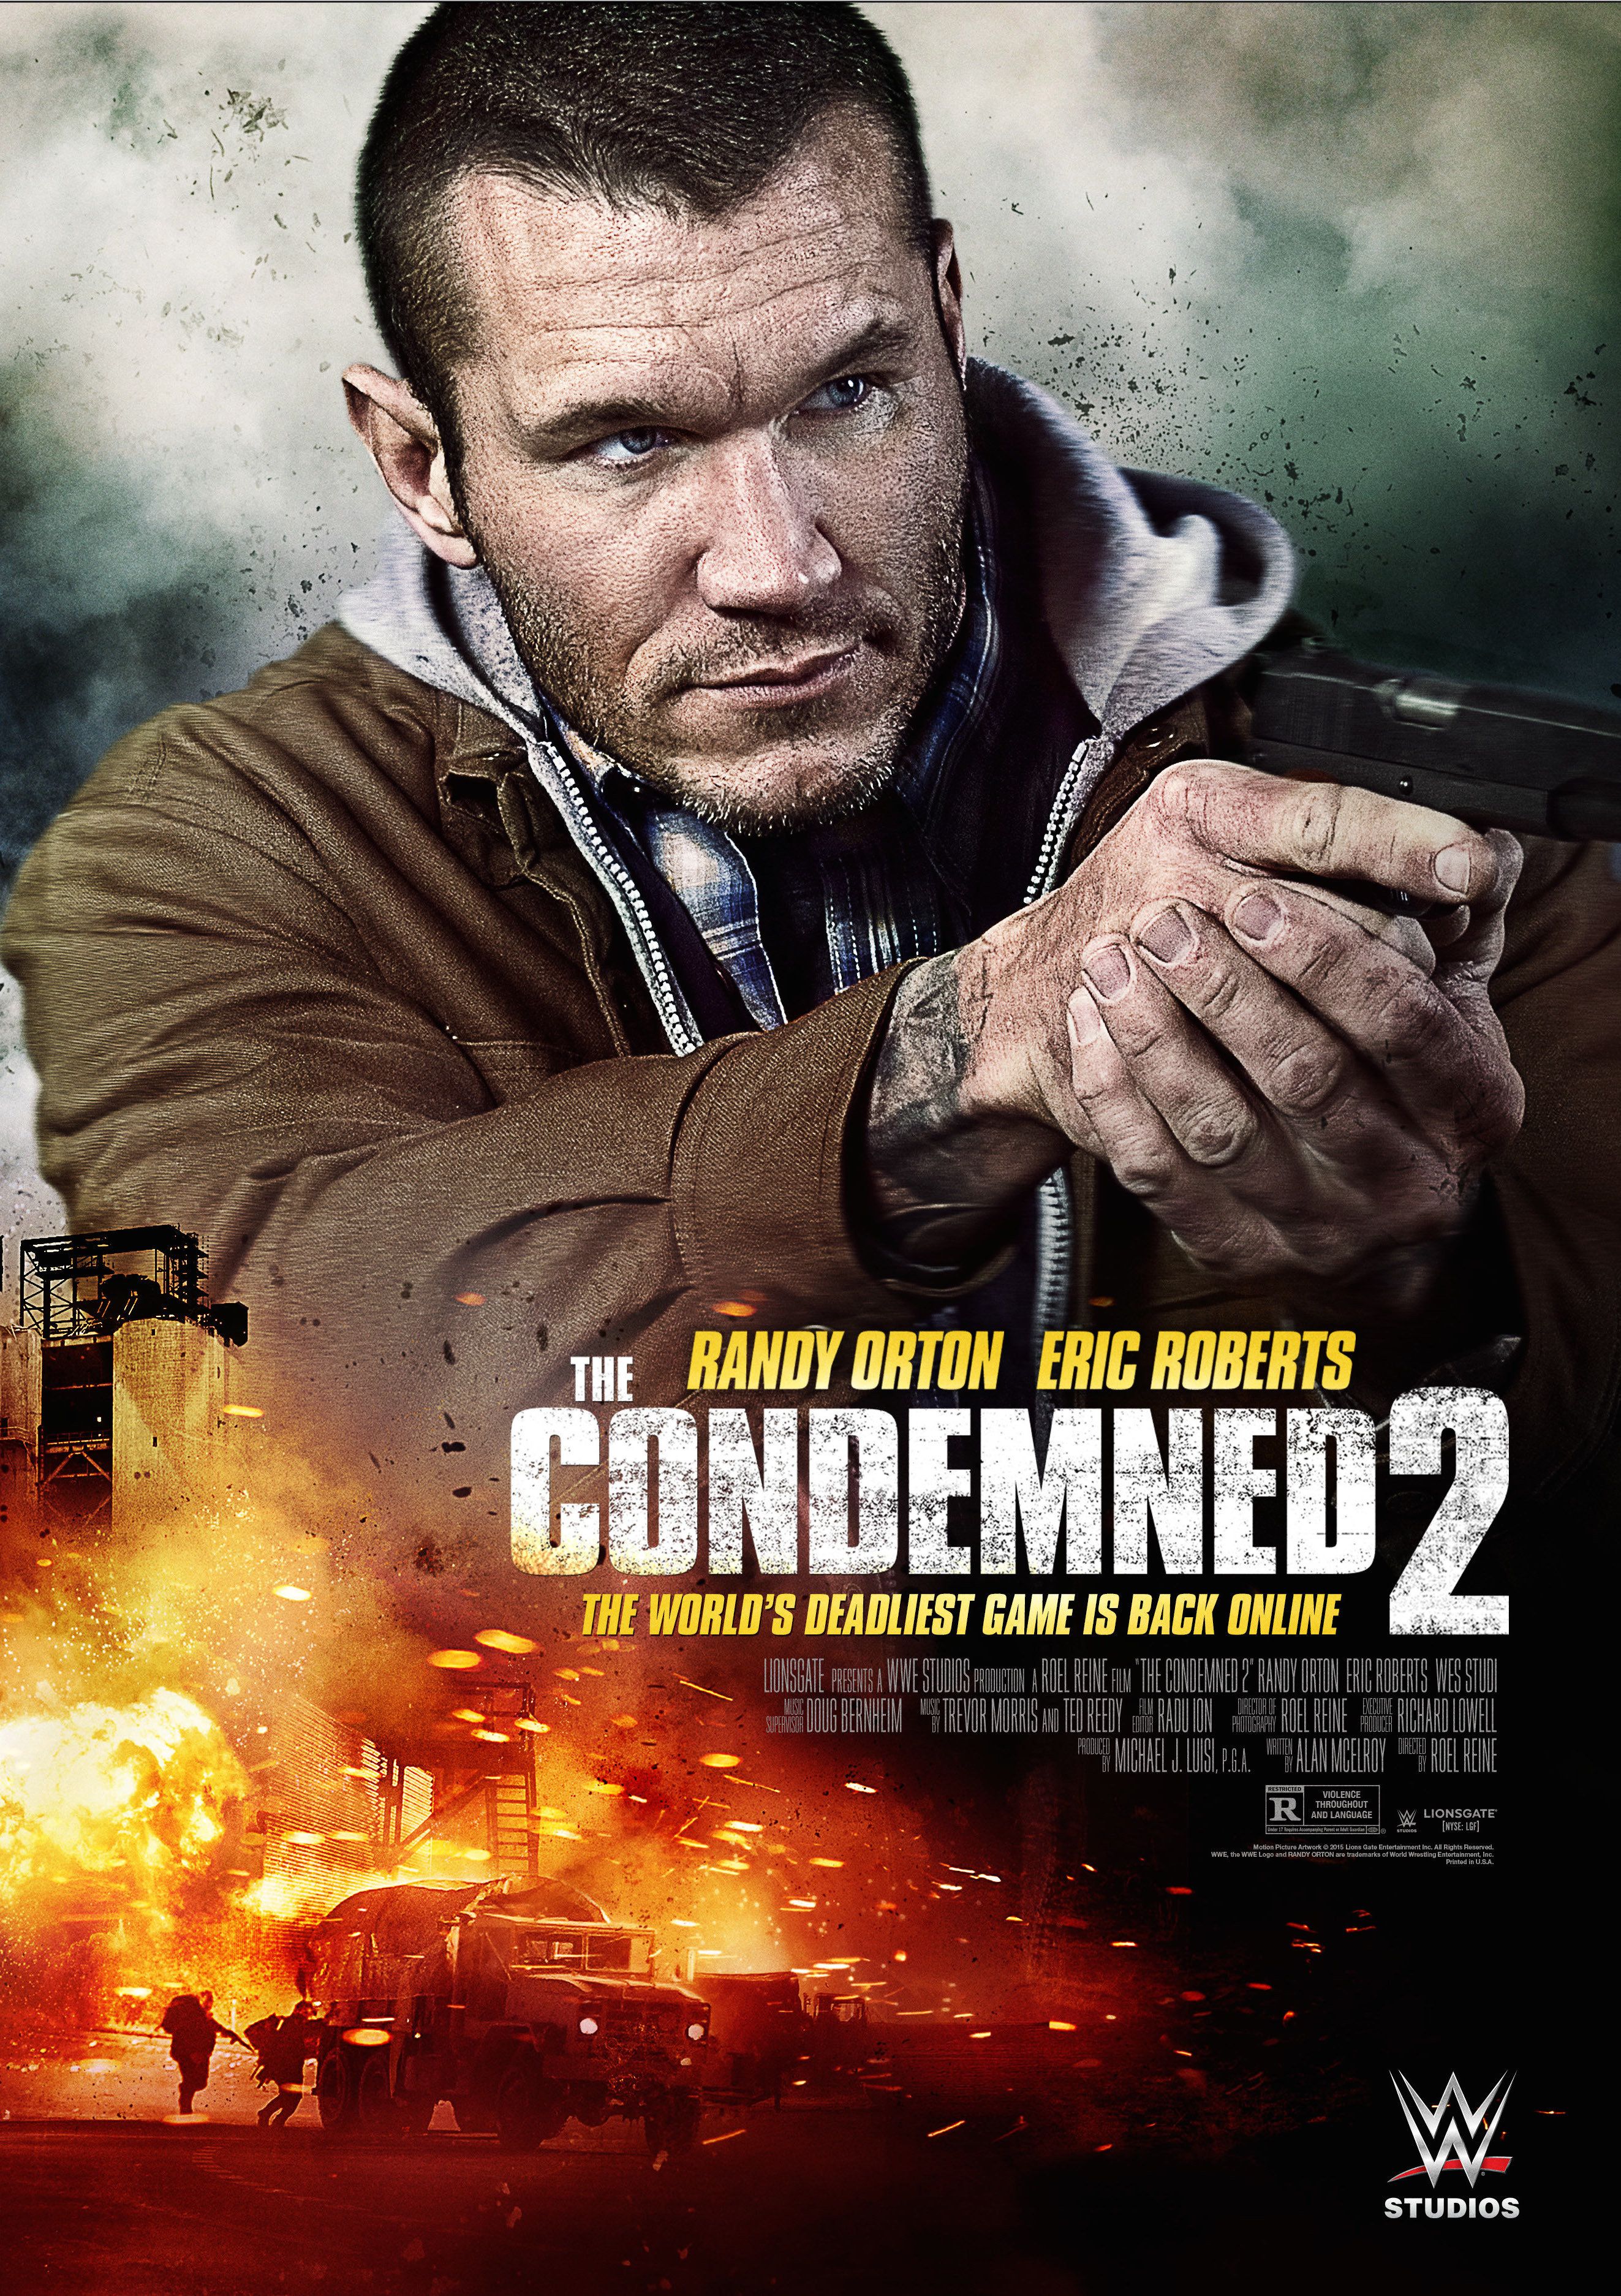 The Condemned 2 (2015) Hindi Dubbed Movie